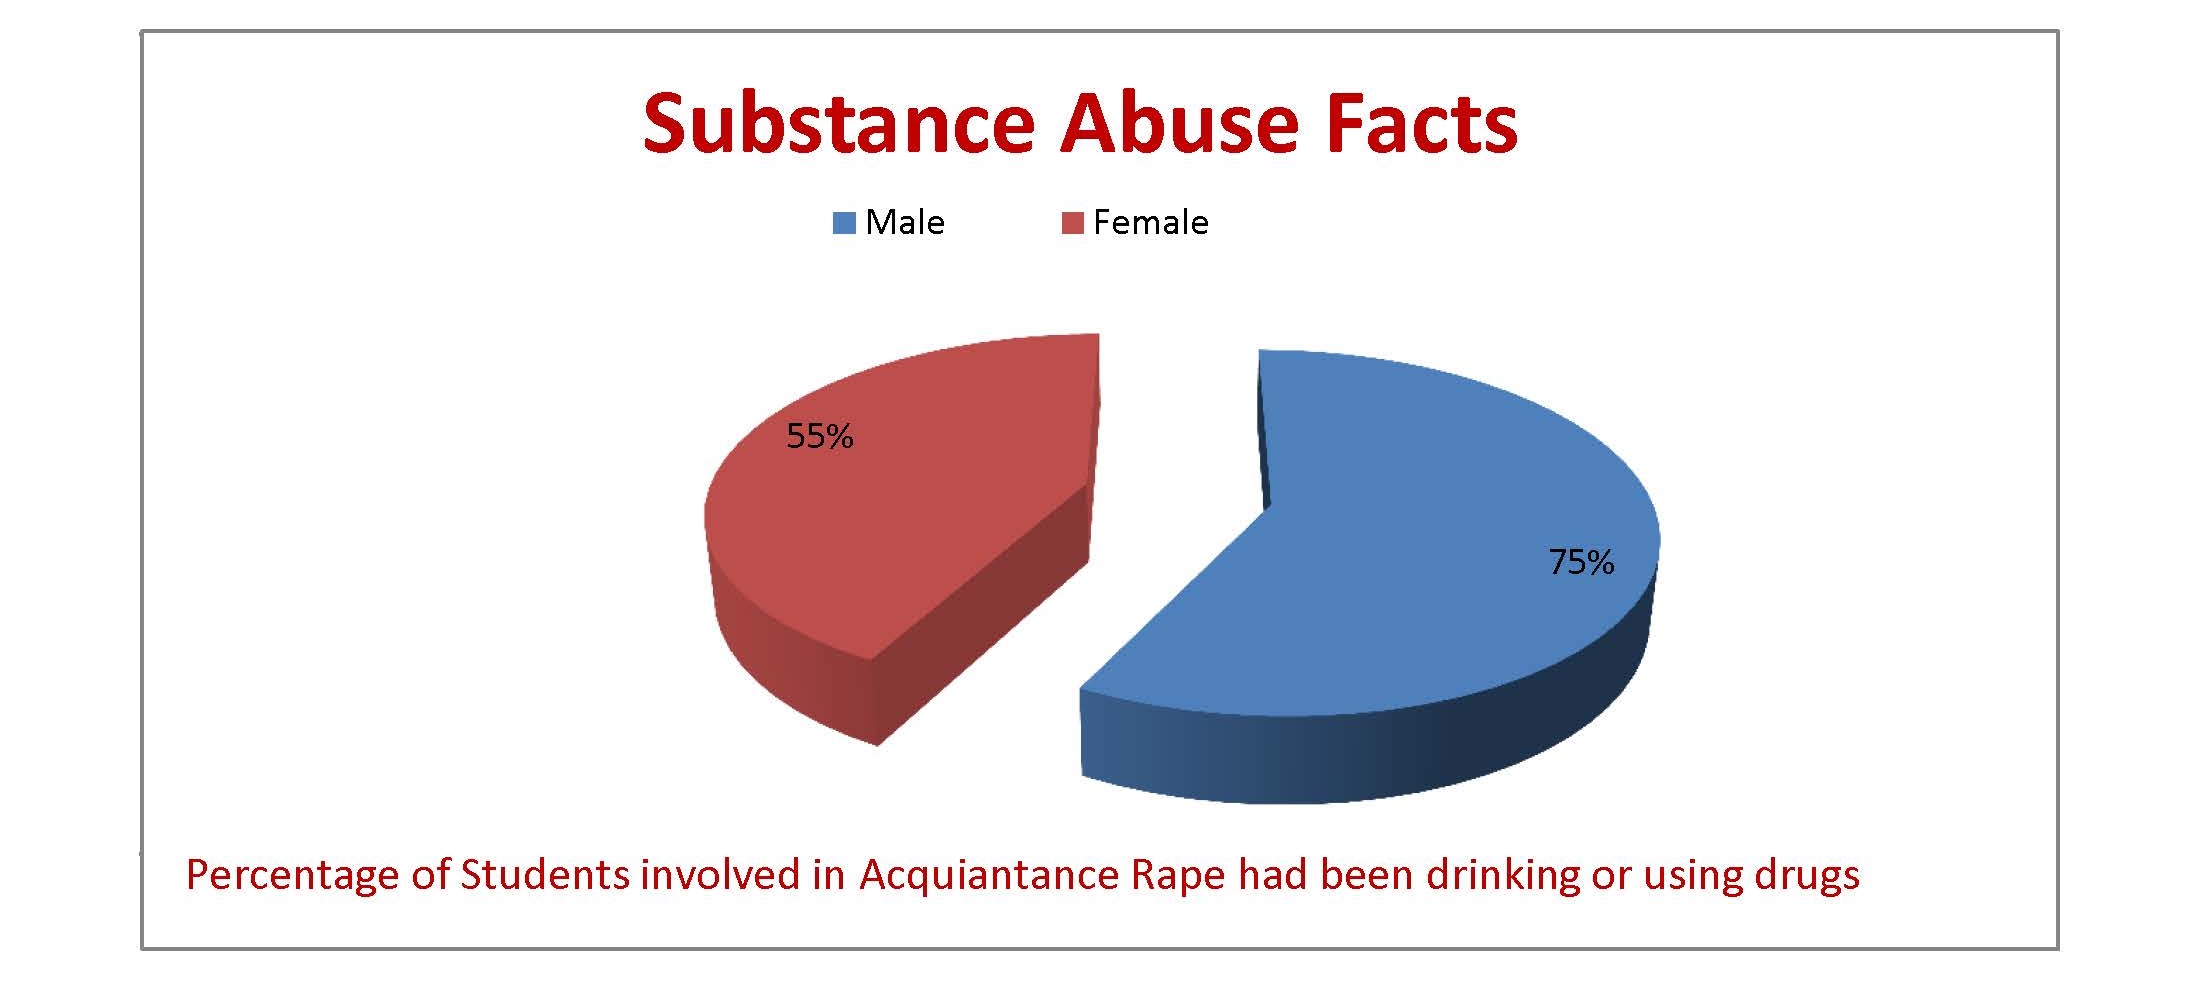 Substance Abuse Facts chart